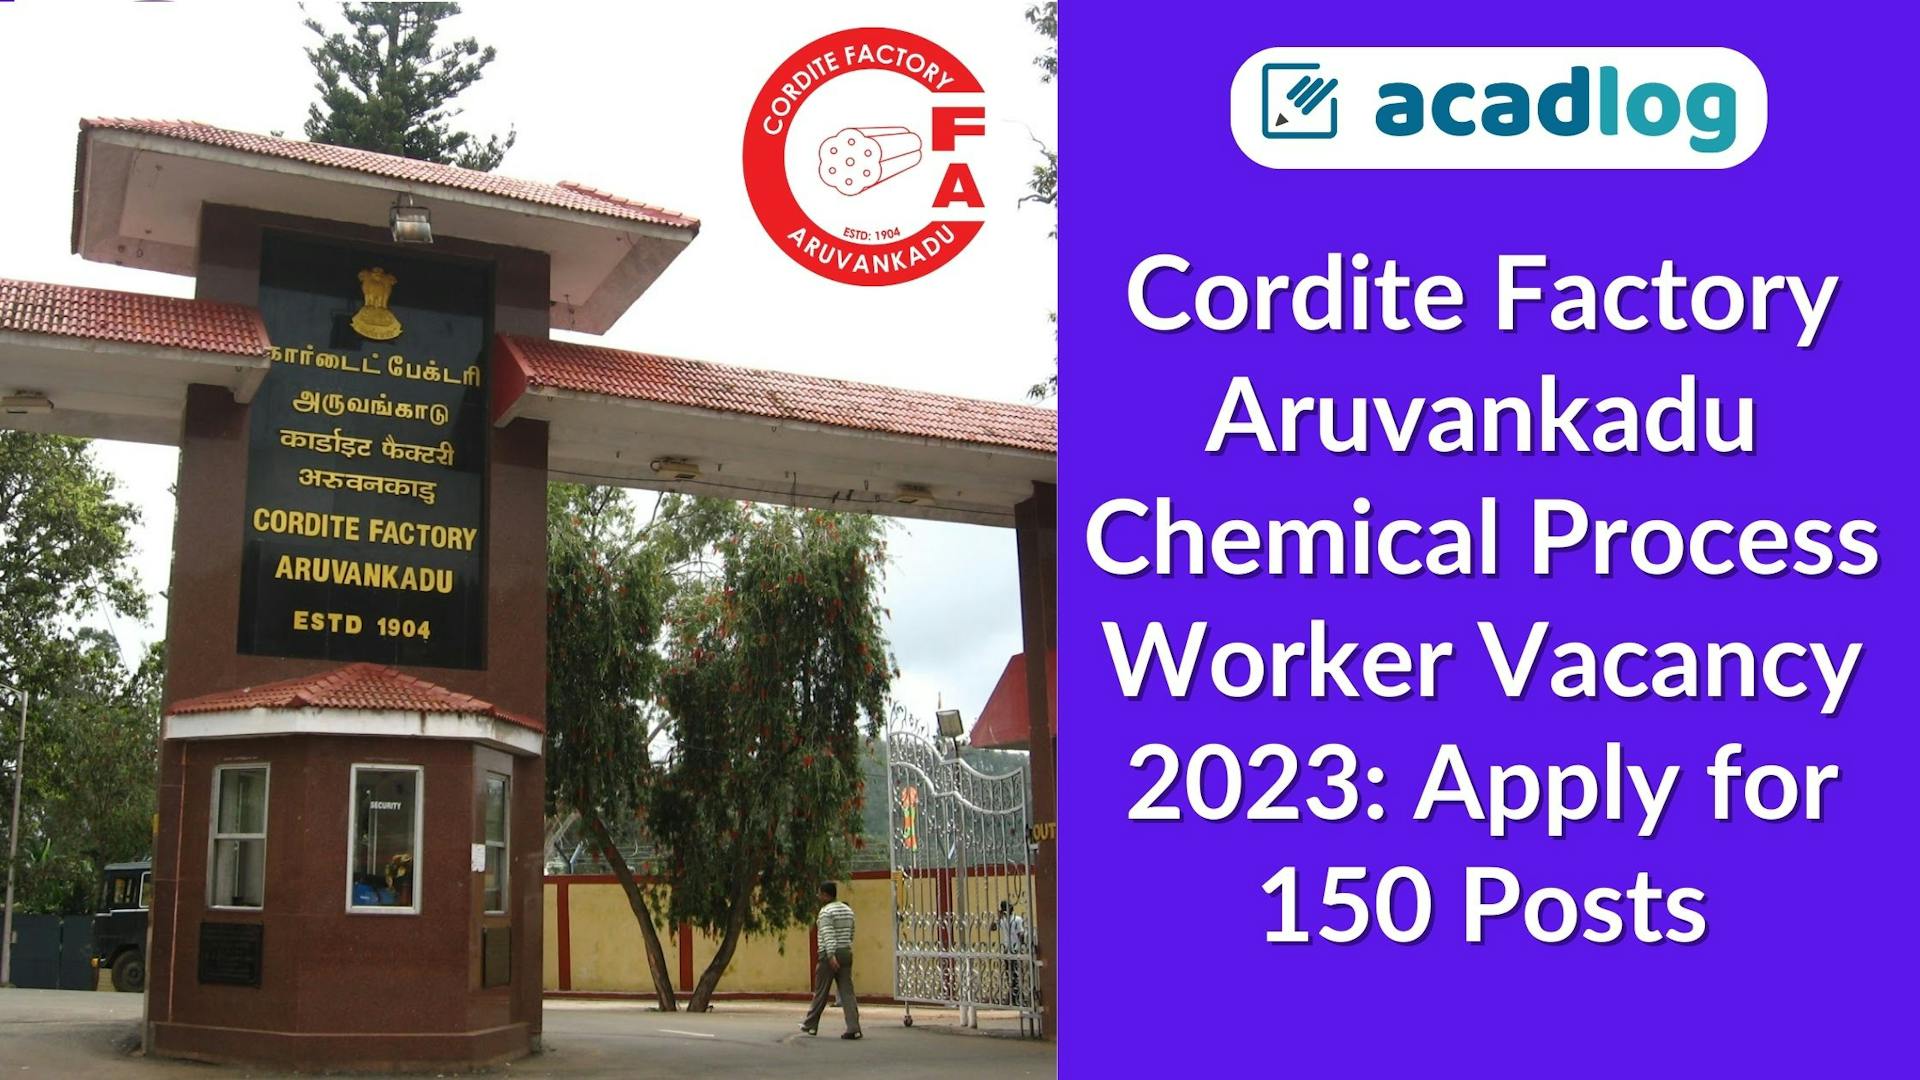 Cordite Factory Aruvankadu Chemical Process Worker Vacancy 2023: Apply for 150 Posts